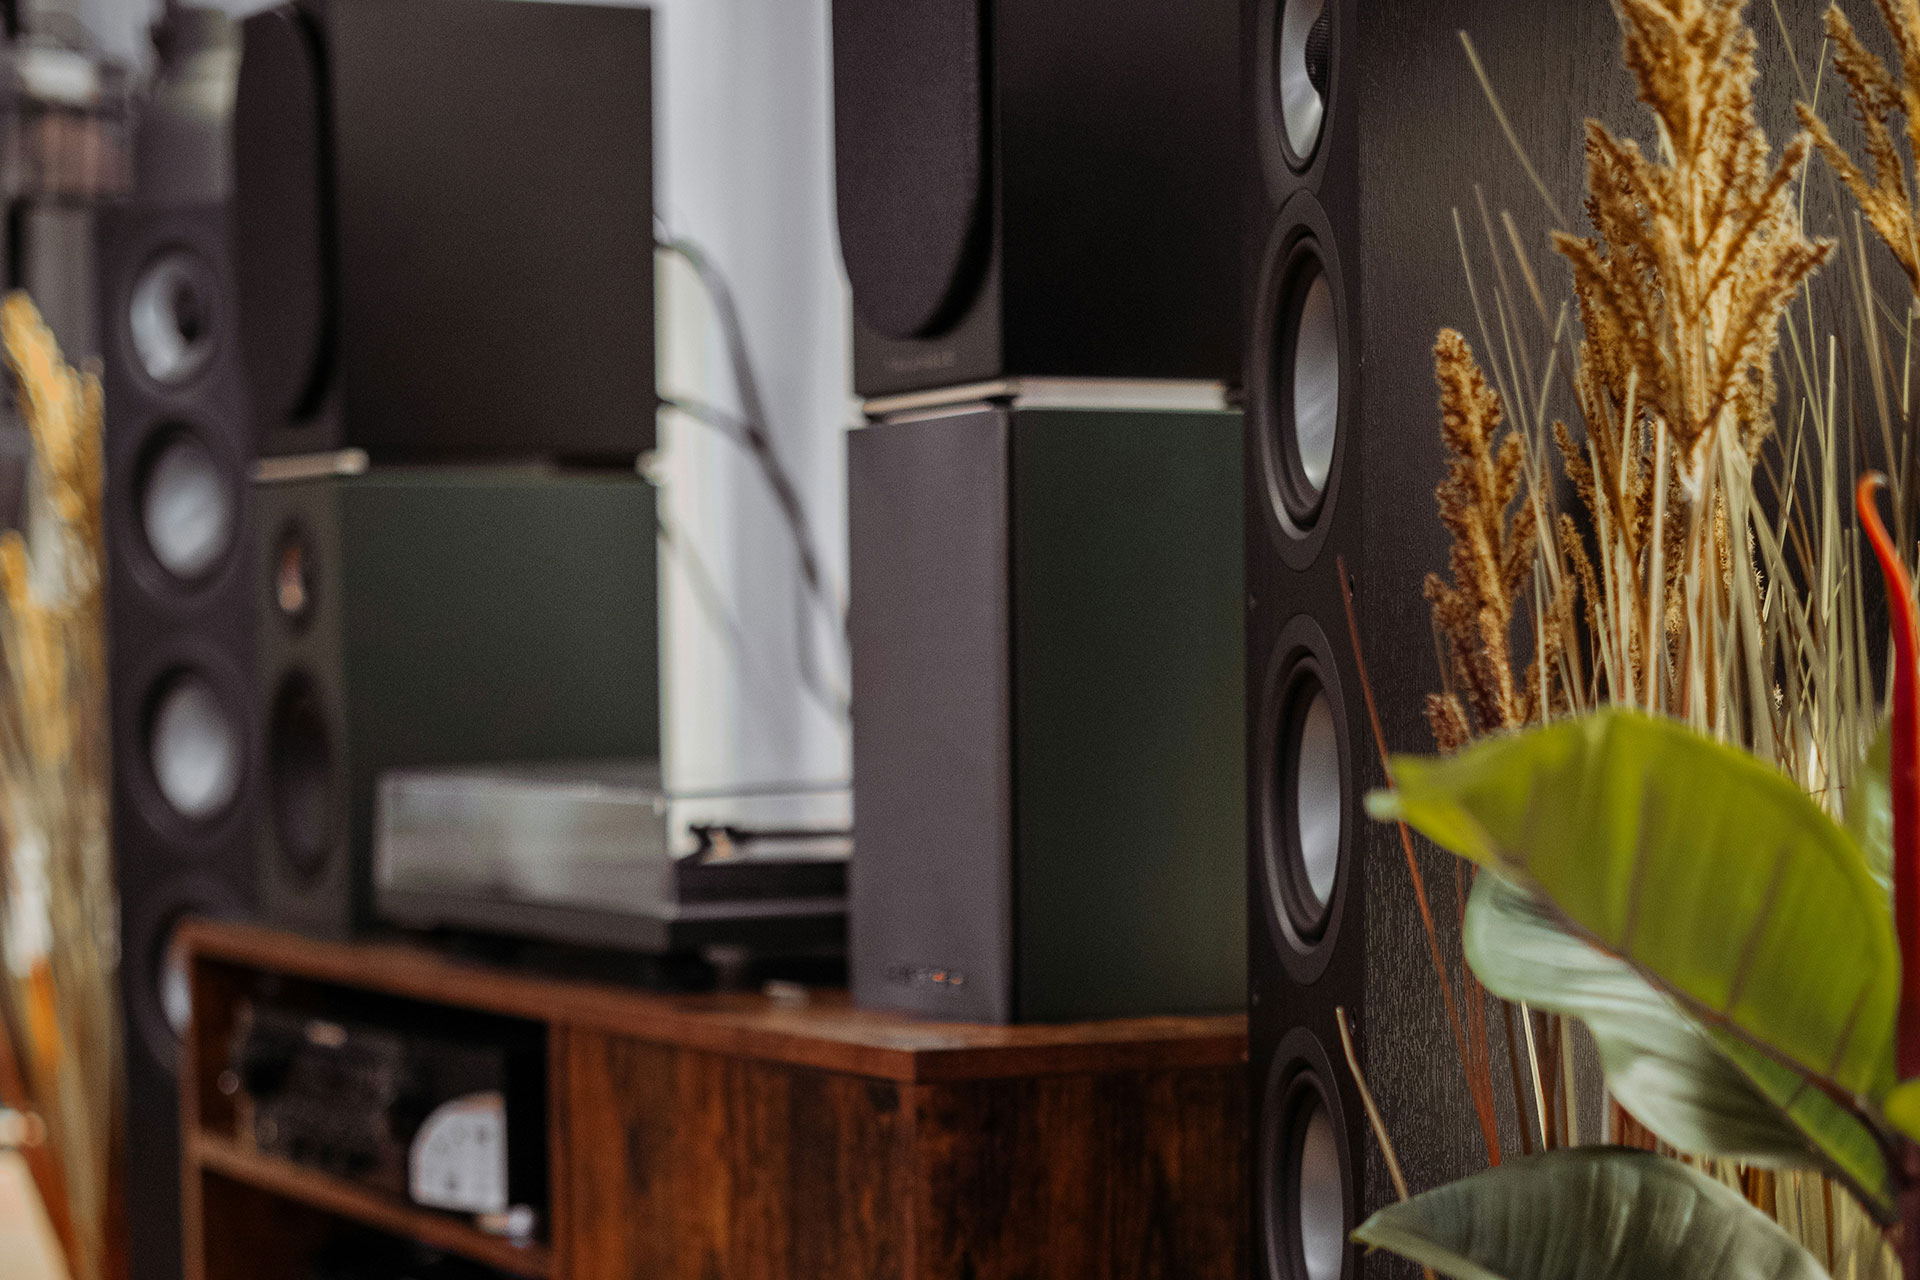 Are You Out of the Audiophile Club If You Stop Buying Gear?